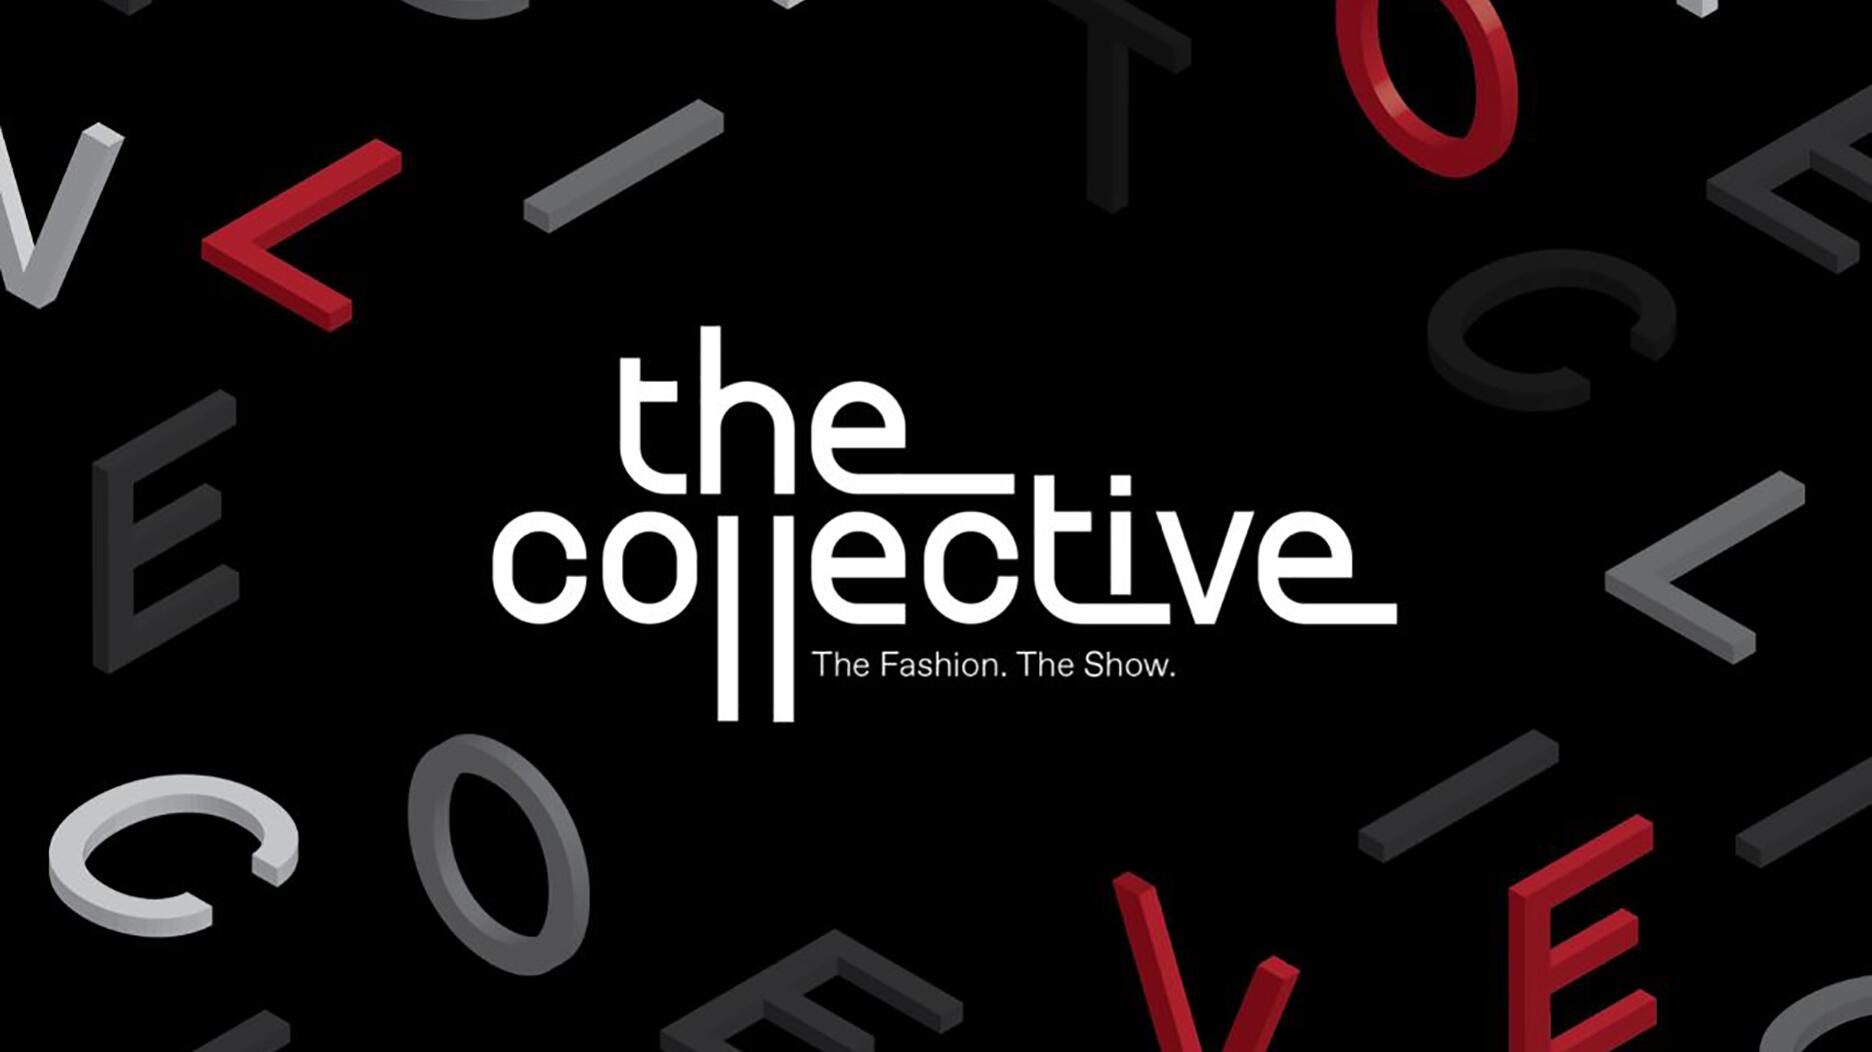 20210719_The Collective.jpg